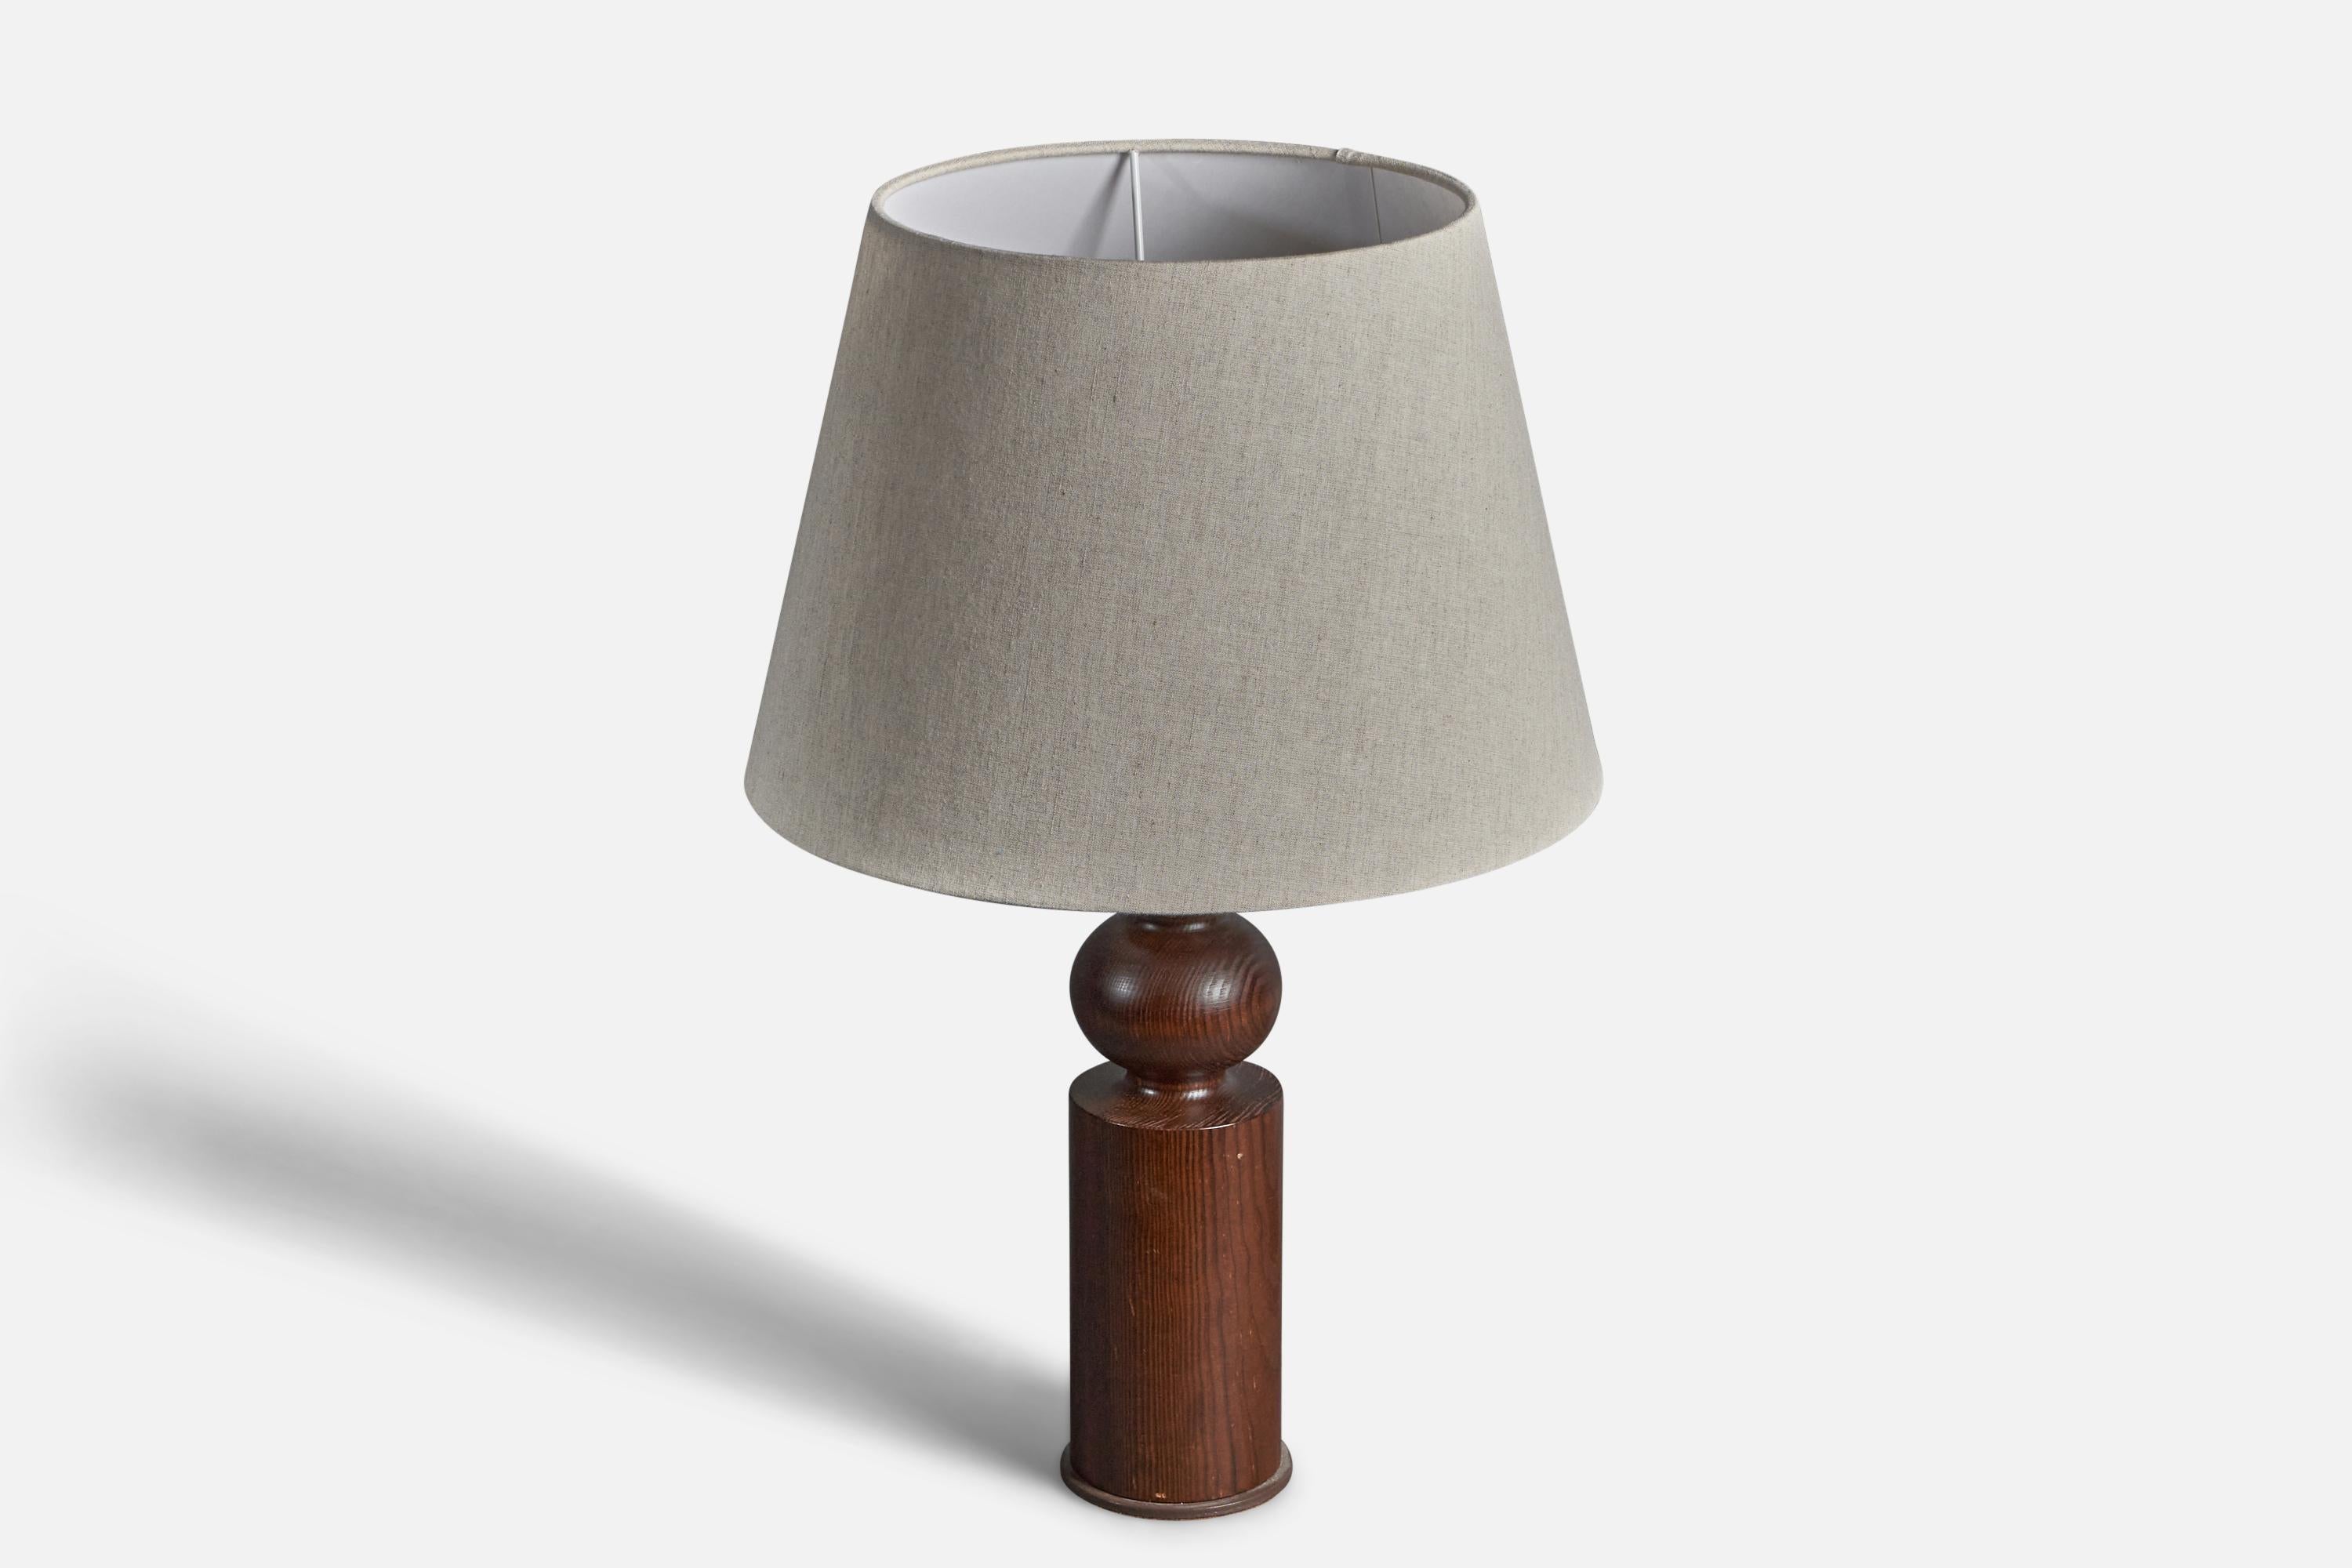 A sculptural solid pine table lamp. Designed by Uno Kristiansson, for Luxus, Sweden, 1970s. Branded and labeled. Metal foot to base.

Stated dimensions exclude lampshade, height includes socket. Sold without lampshade.

Other designers of the